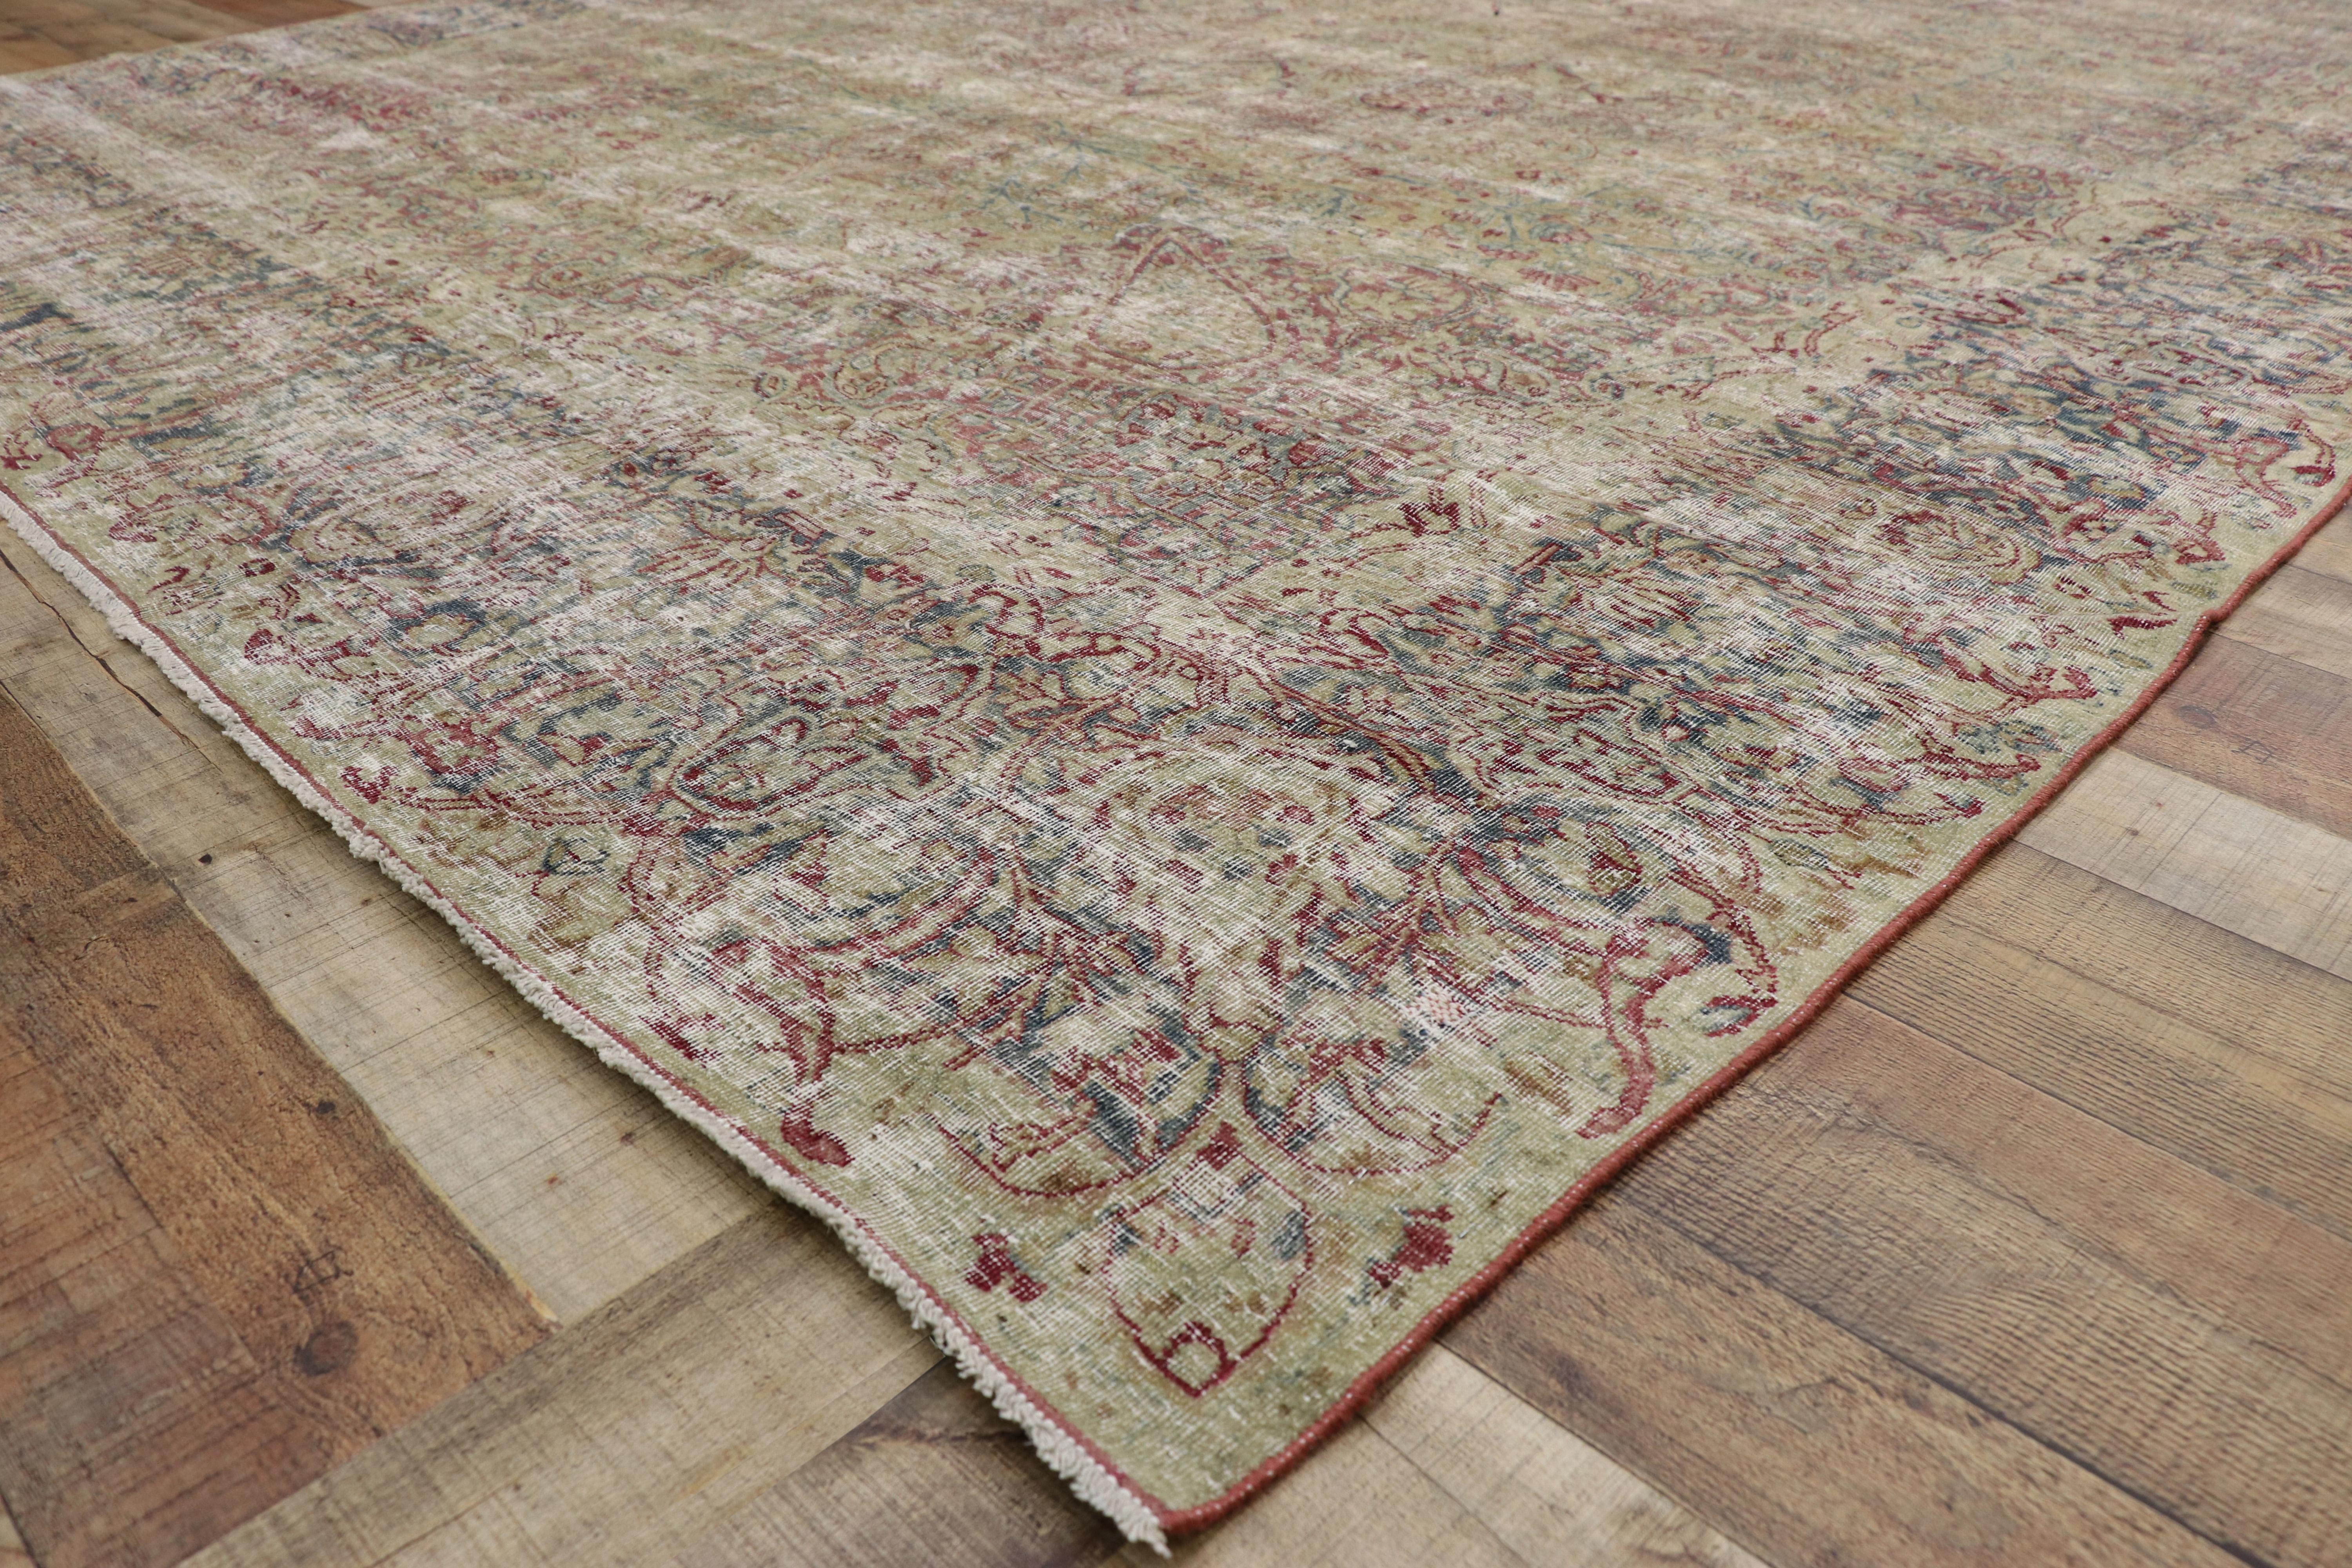 Distressed Antique Persian Kerman Rug with Modern Rustic English Cottage Style For Sale 3